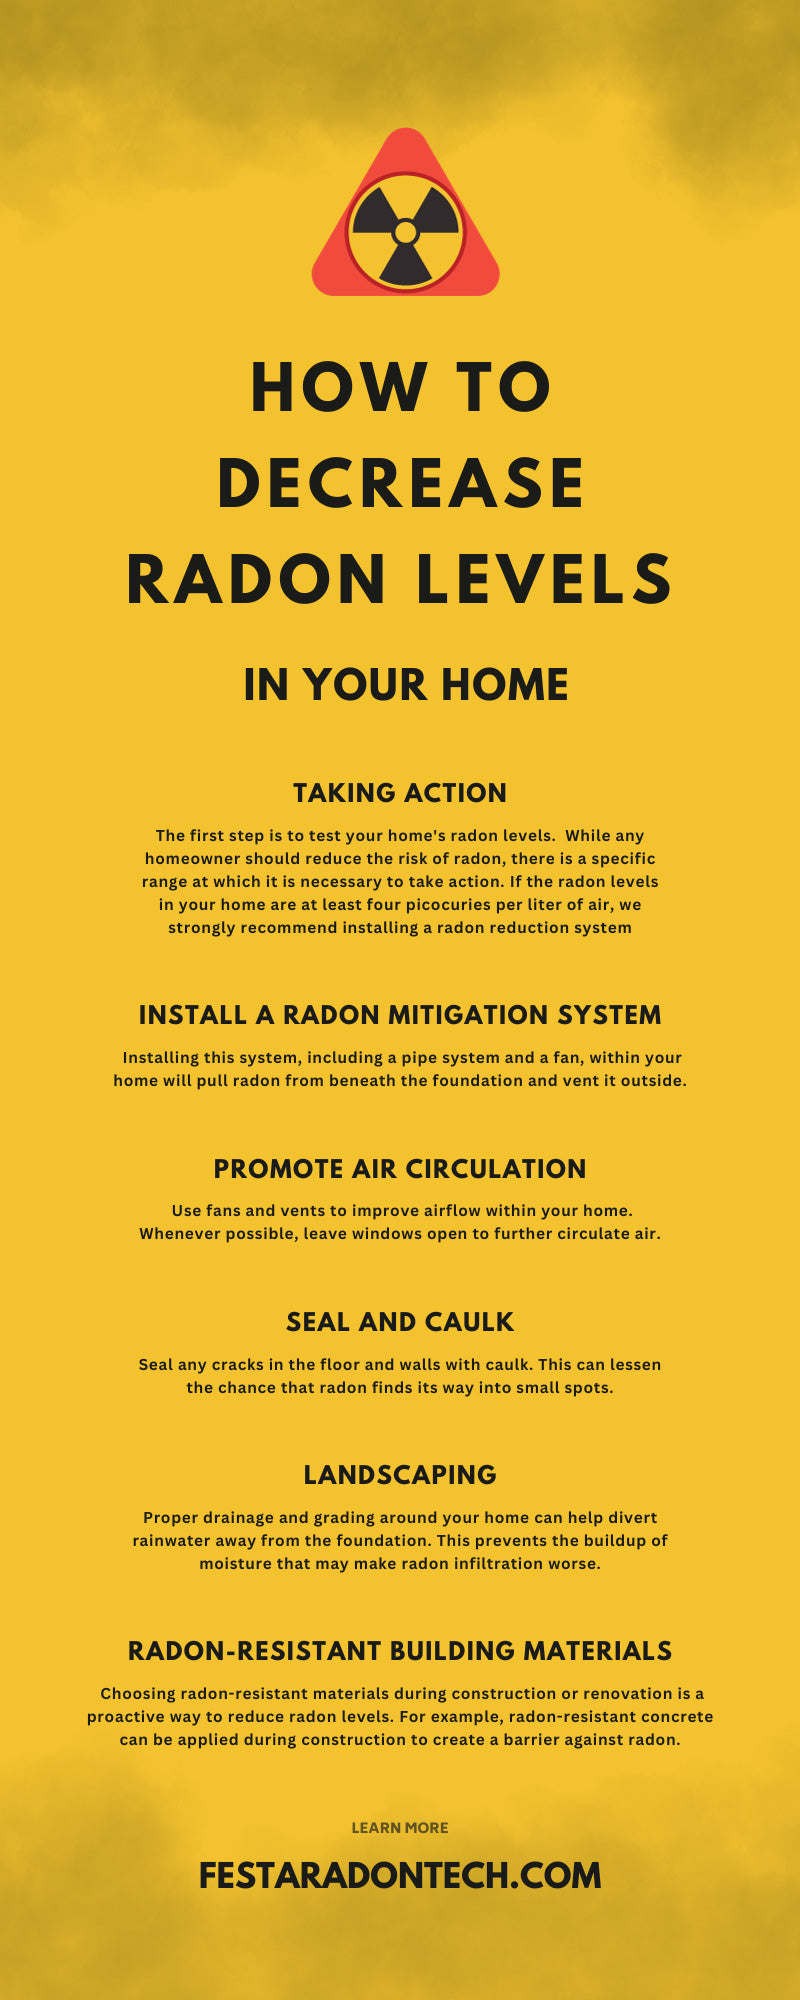 How To Decrease Radon Levels in Your Home